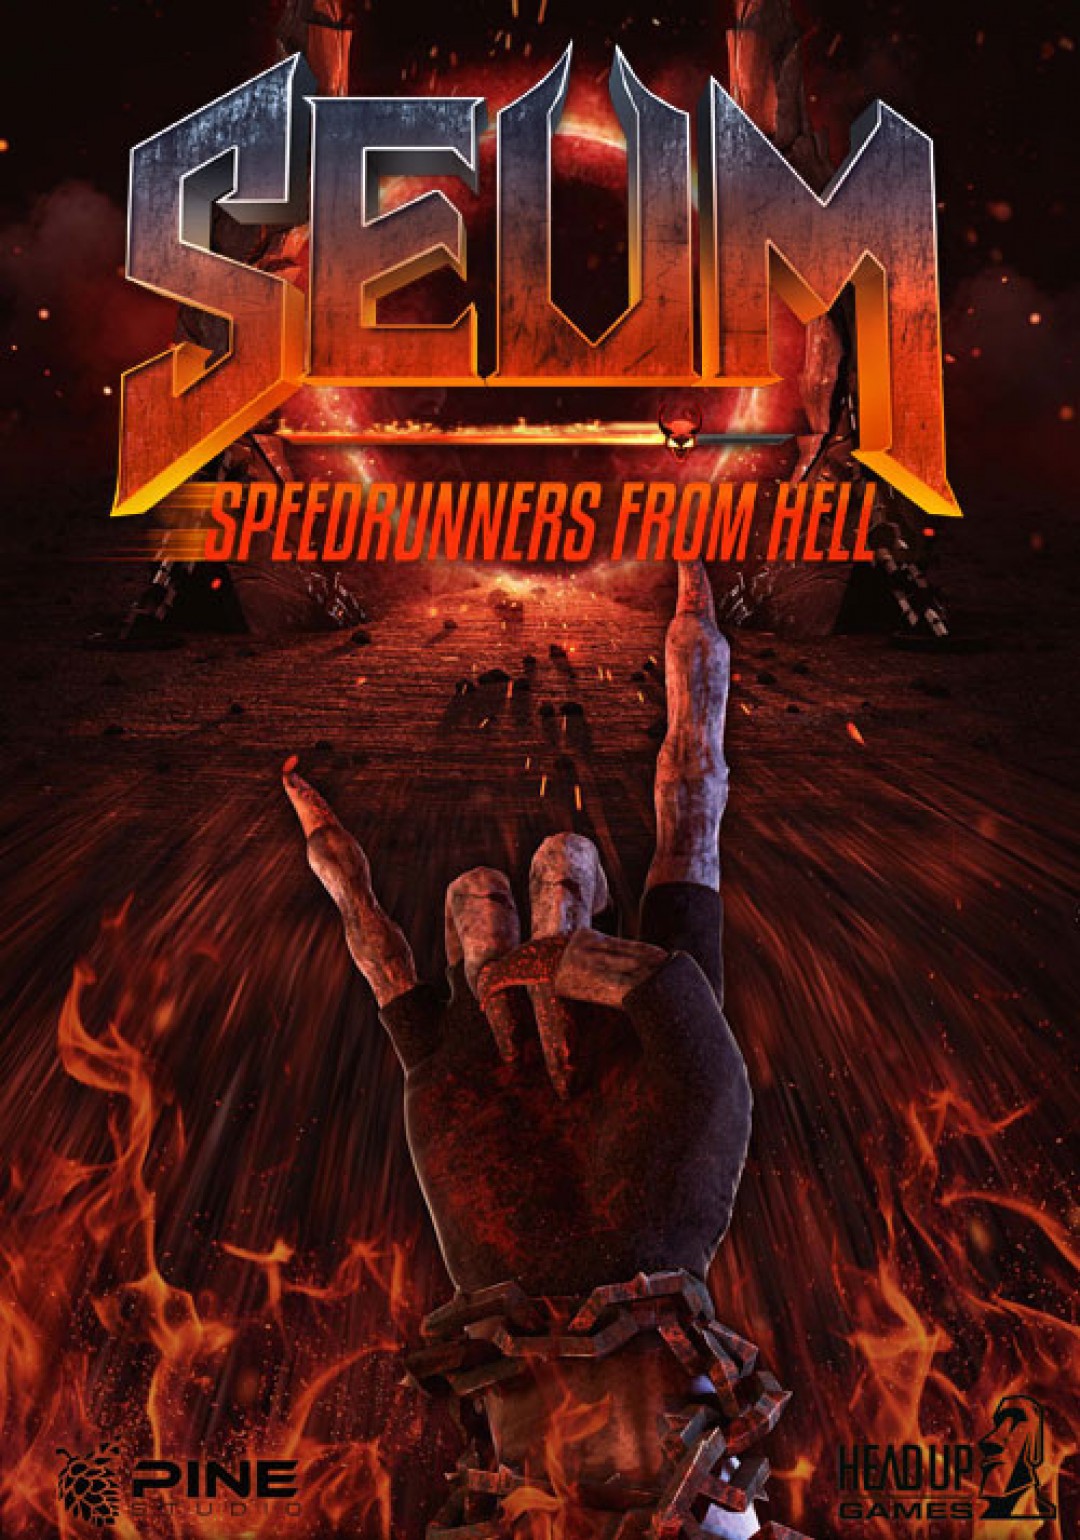 Pc Seum Speedrunners From Hell The Schworak Site - new mmorpg game kings calling pre alpha roblox part 1